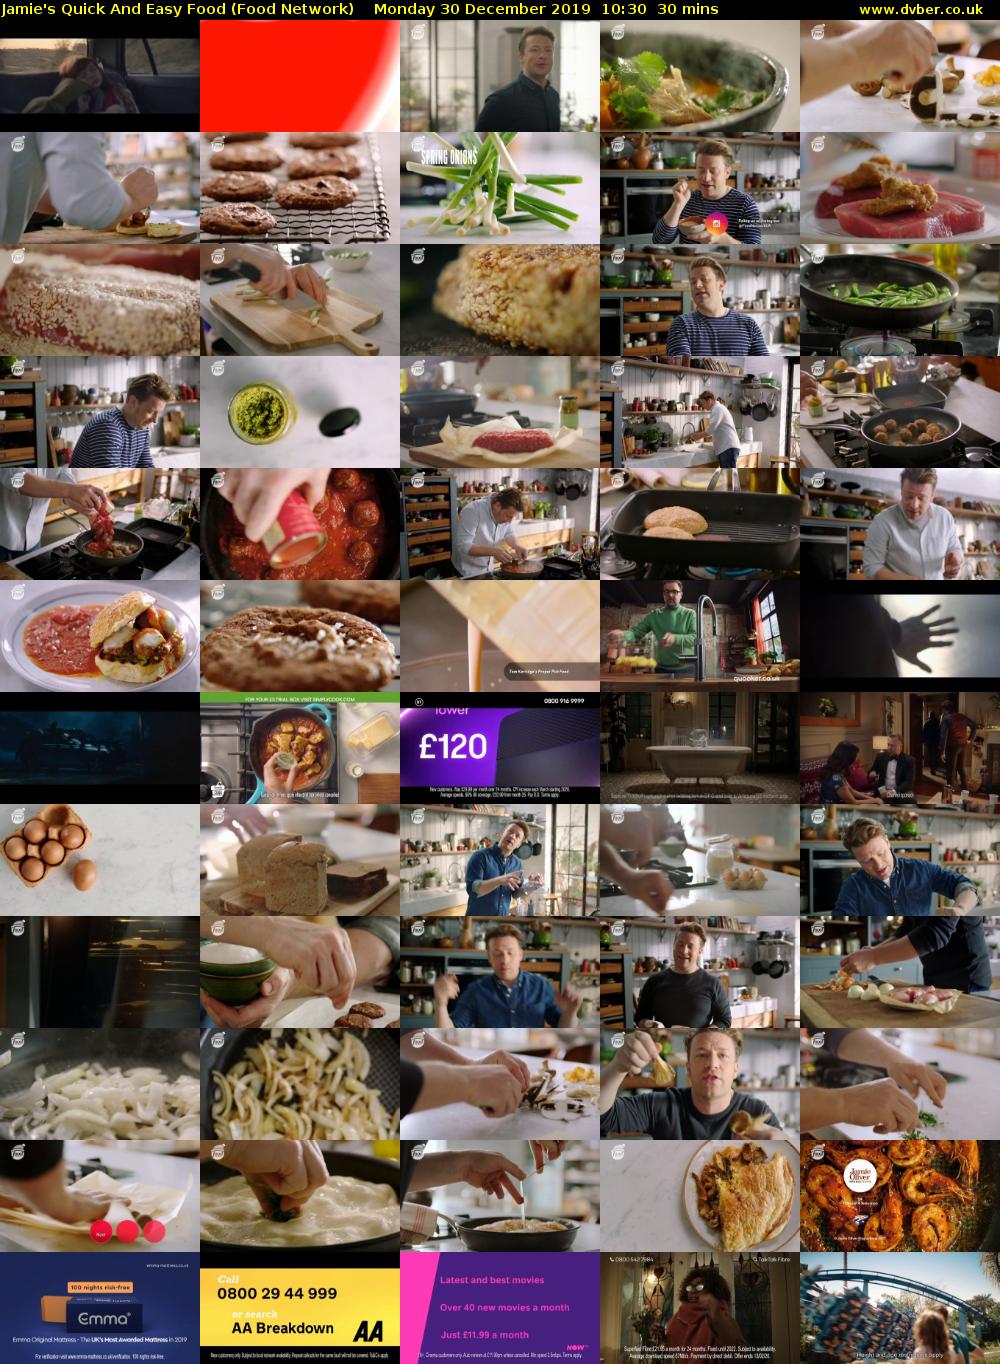 Jamie's Quick And Easy Food (Food Network) Monday 30 December 2019 10:30 - 11:00